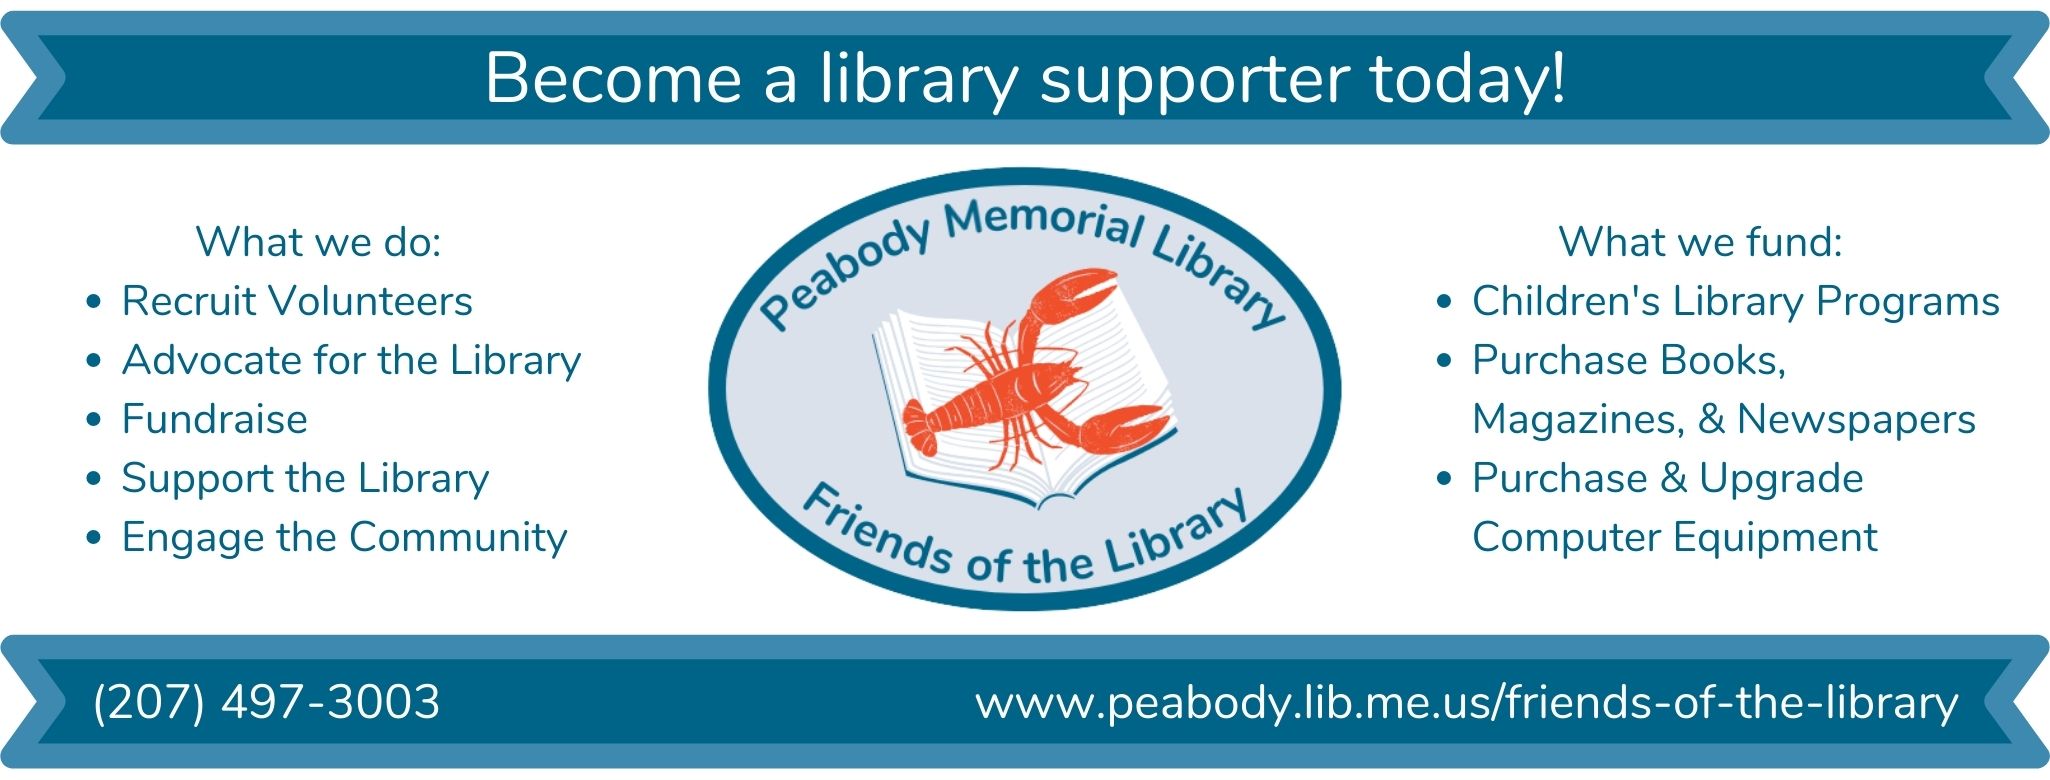 Delphi Public Library - Join us this Friday to play Roblox! For